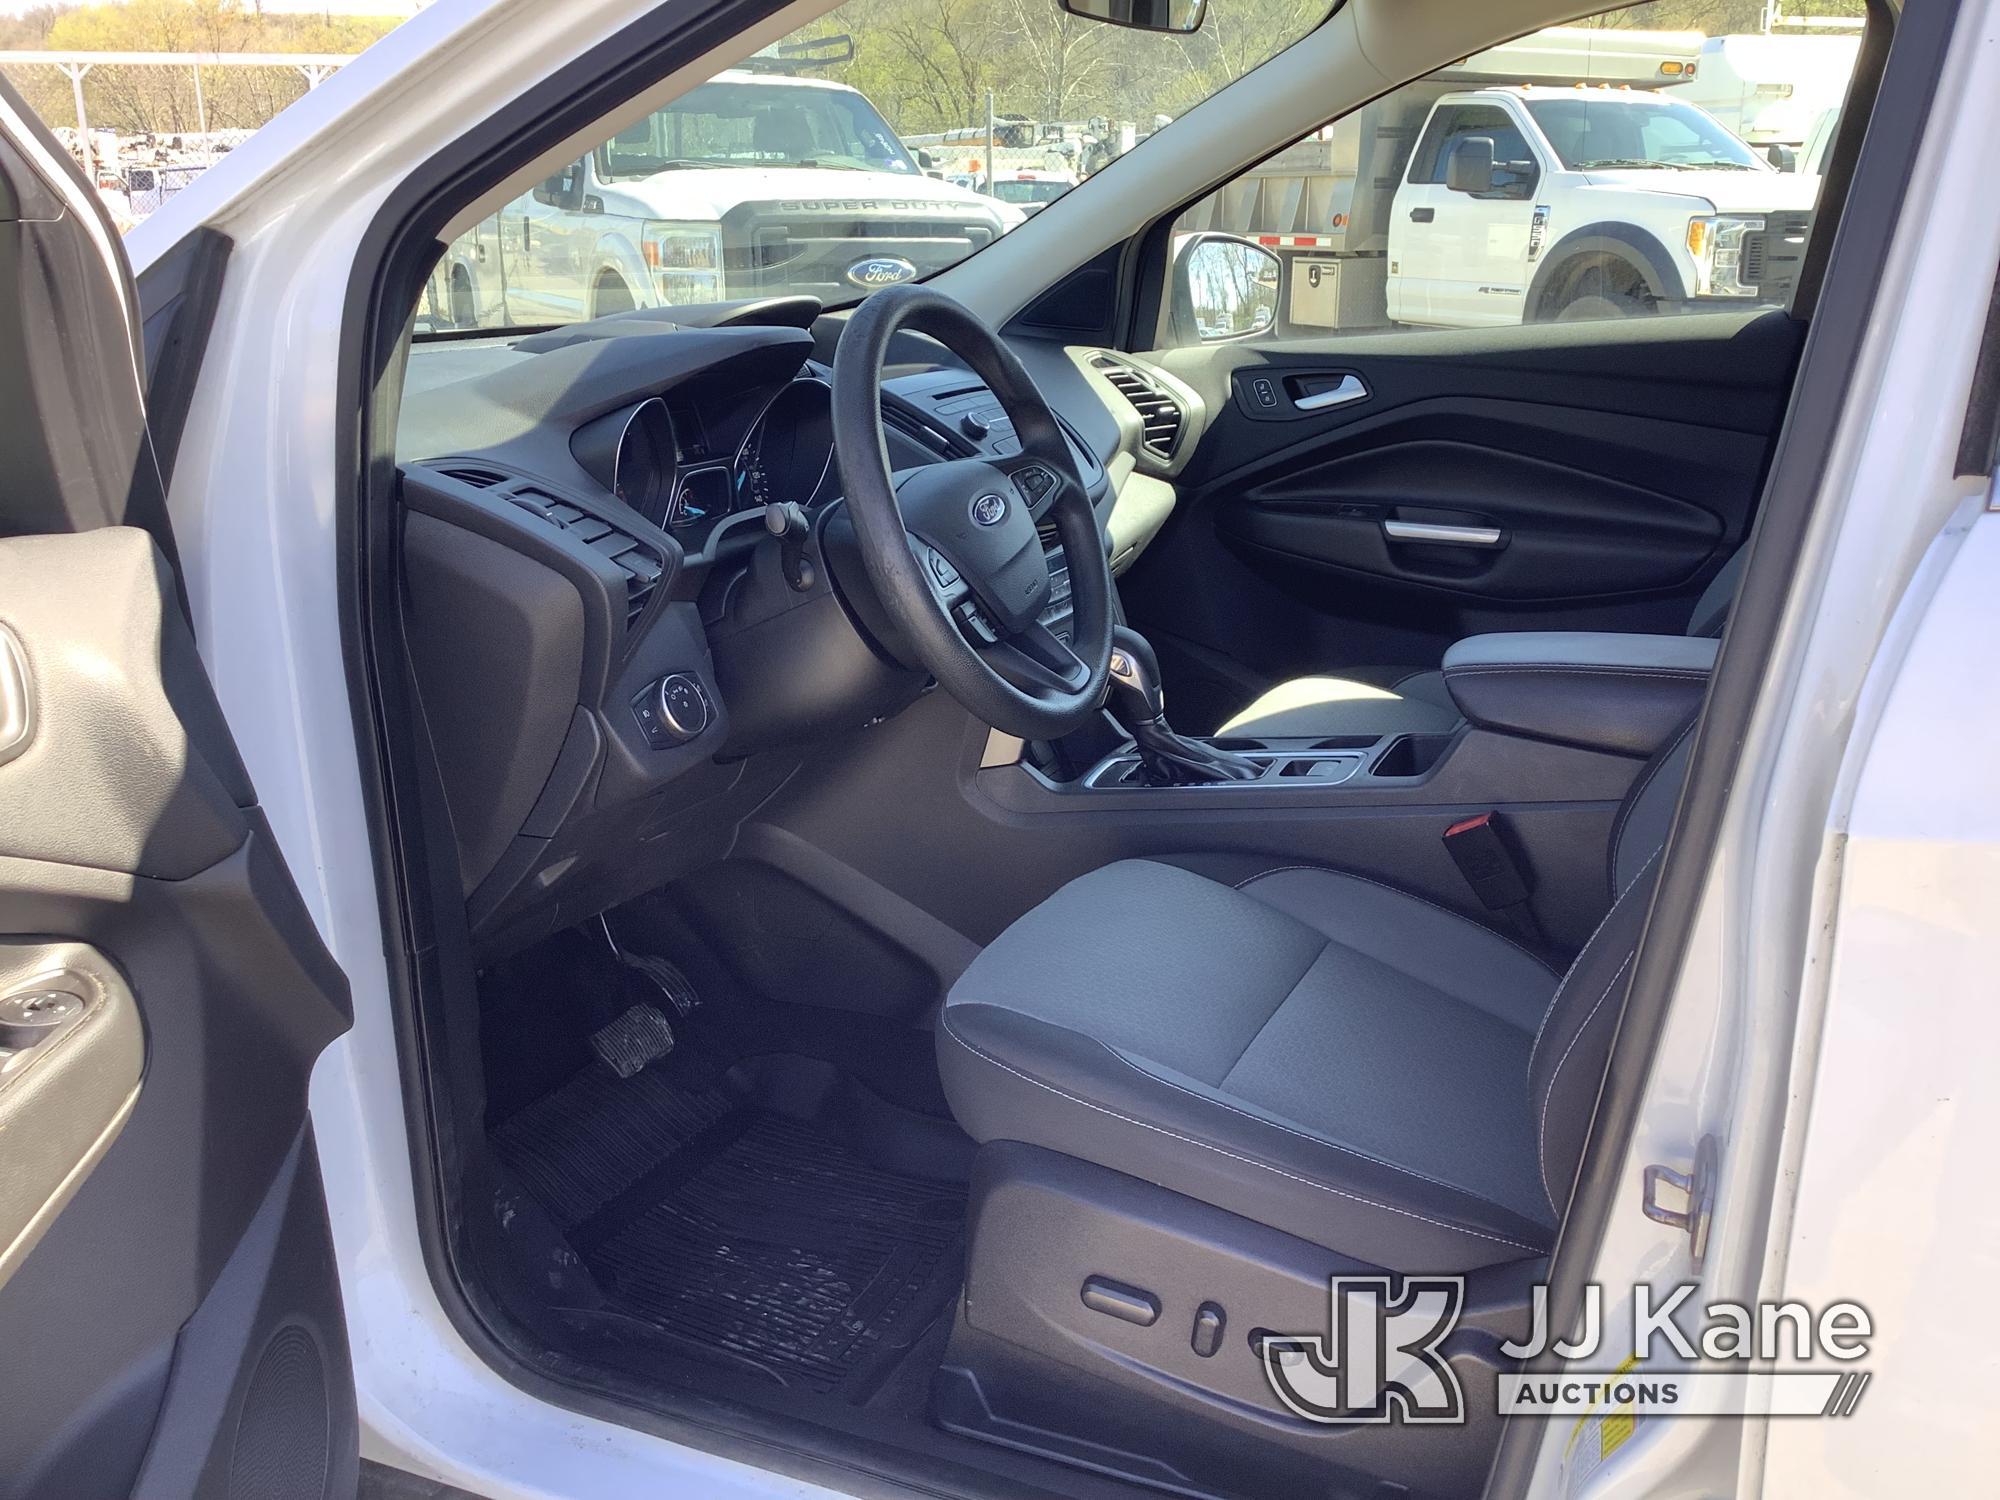 (Smock, PA) 2018 Ford Escape 4x4 4-Door Sport Utility Vehicle Runs & Moves, Rust Damage